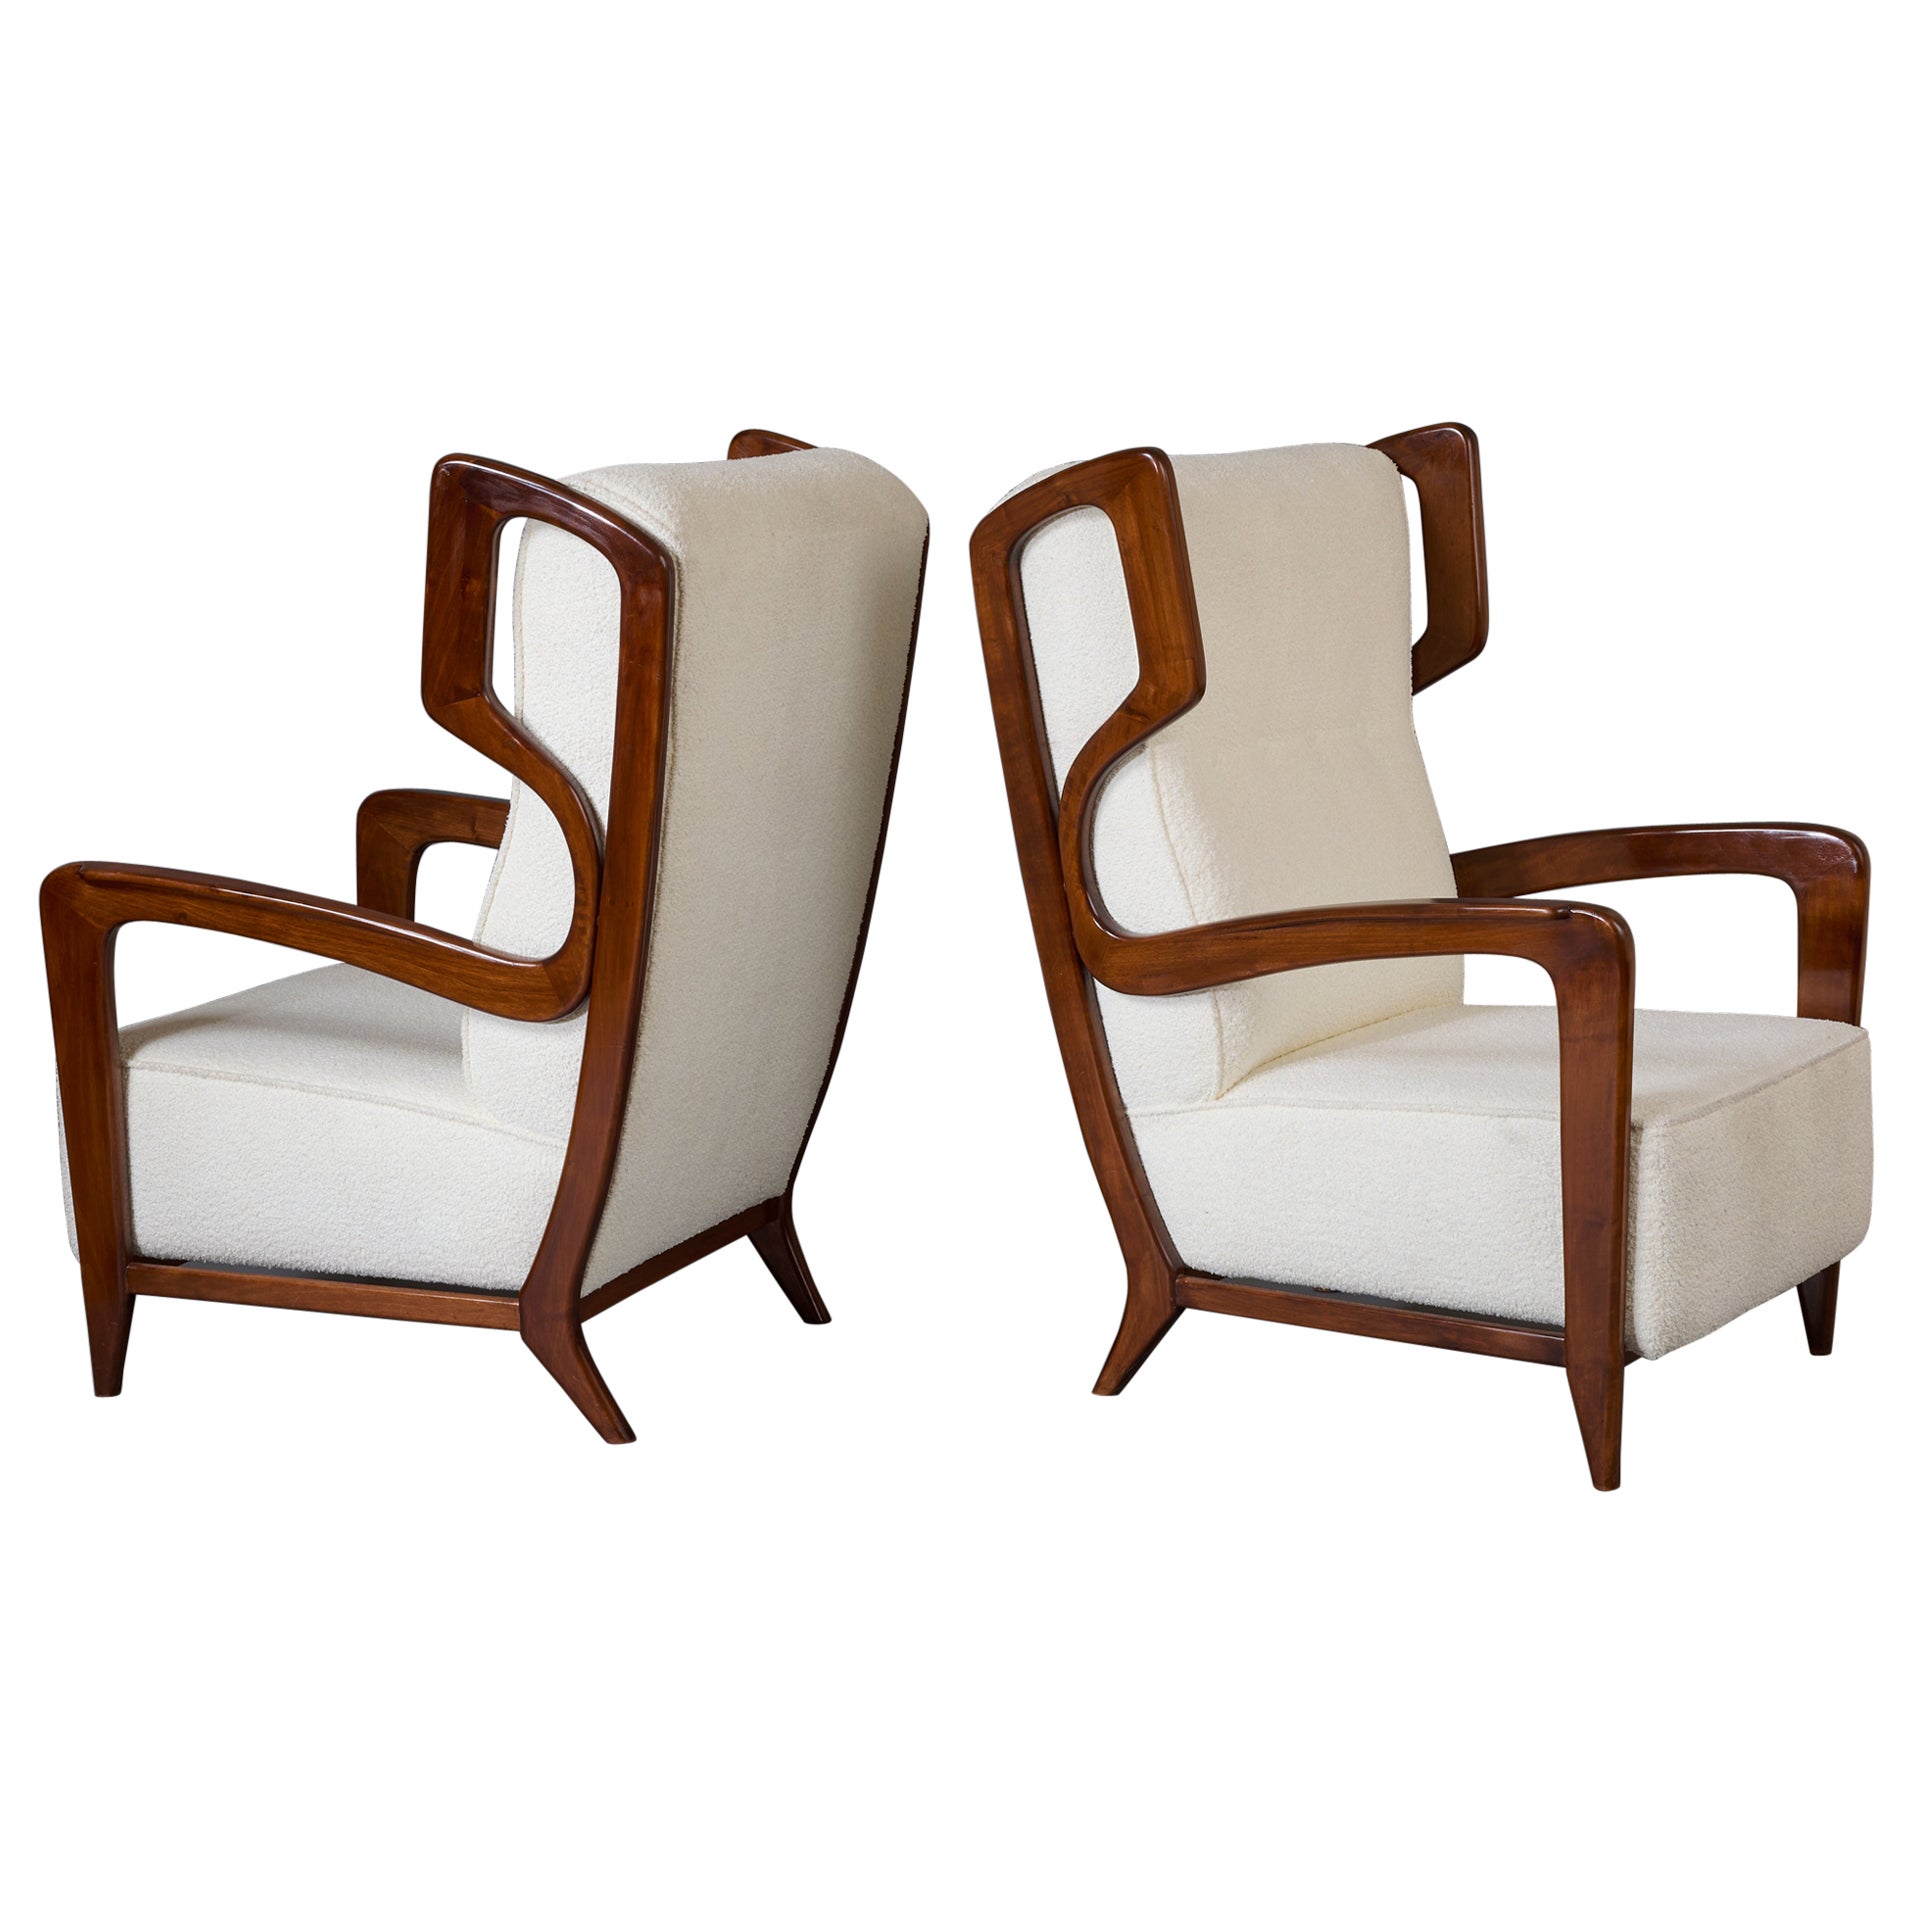 Gio Ponti, Exceptional Pair of Rare Wingback Armchairs in Walnut, Italy, 1940s For Sale